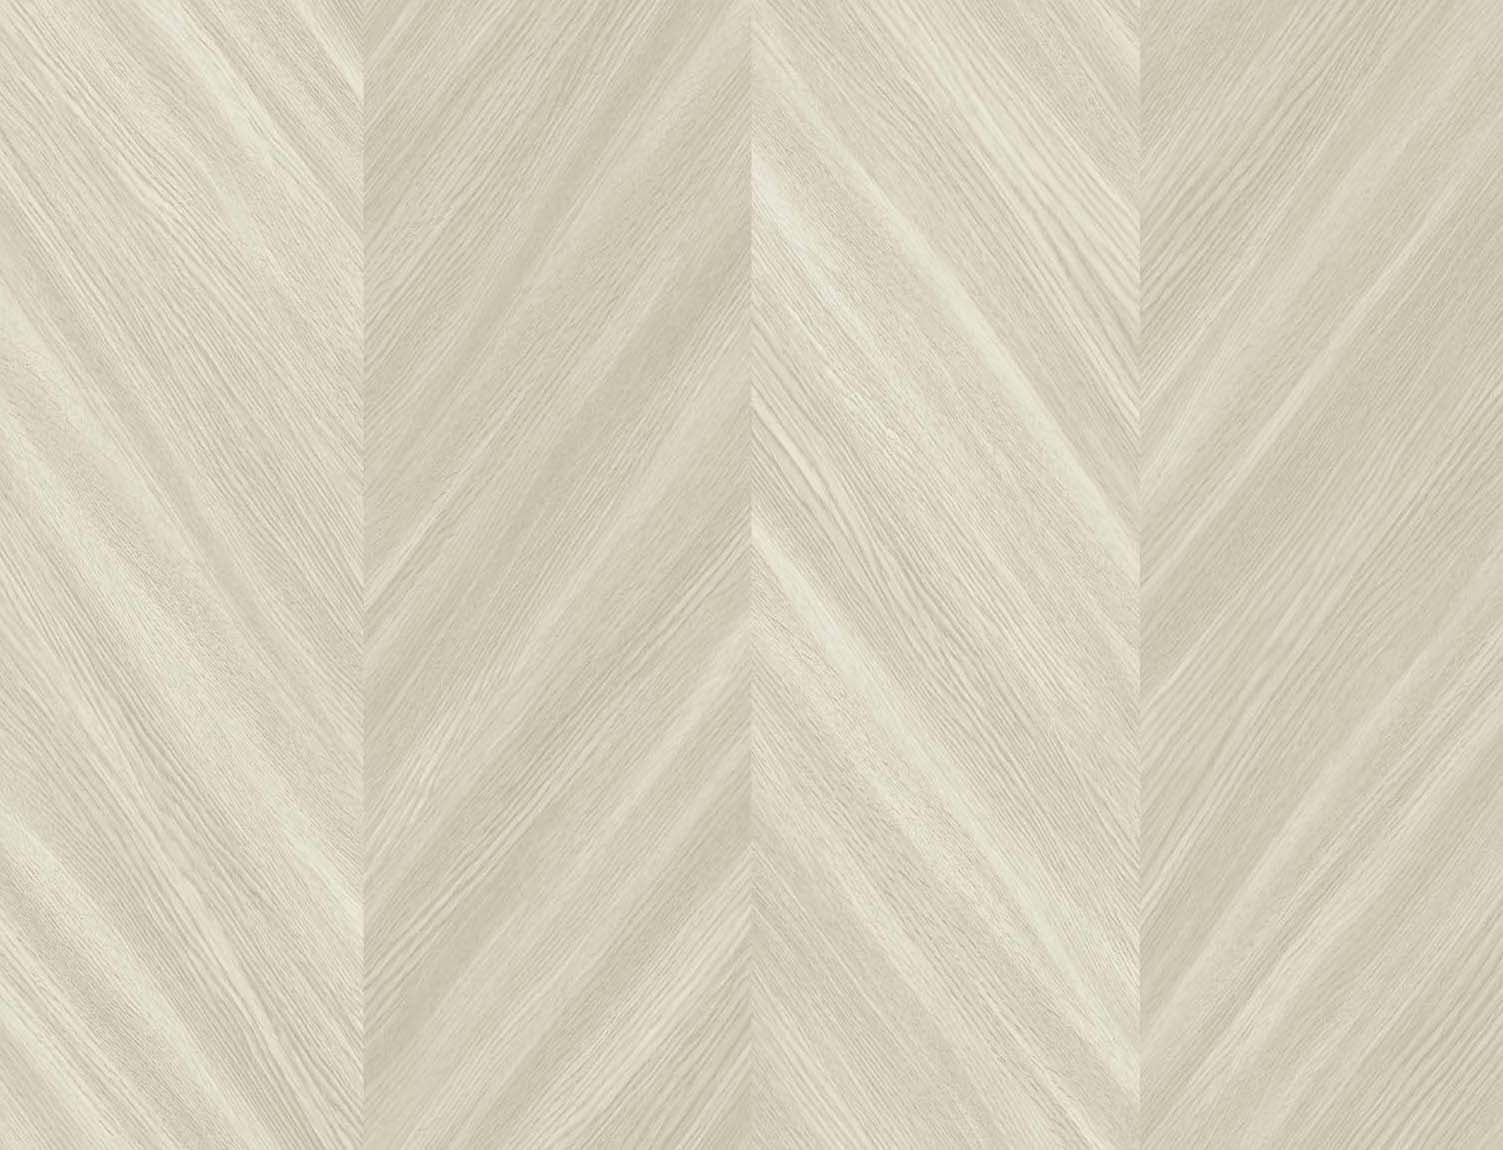 Seabrook Designs TS82106 Even More Textures Chevron Wood  Wallpaper Bister